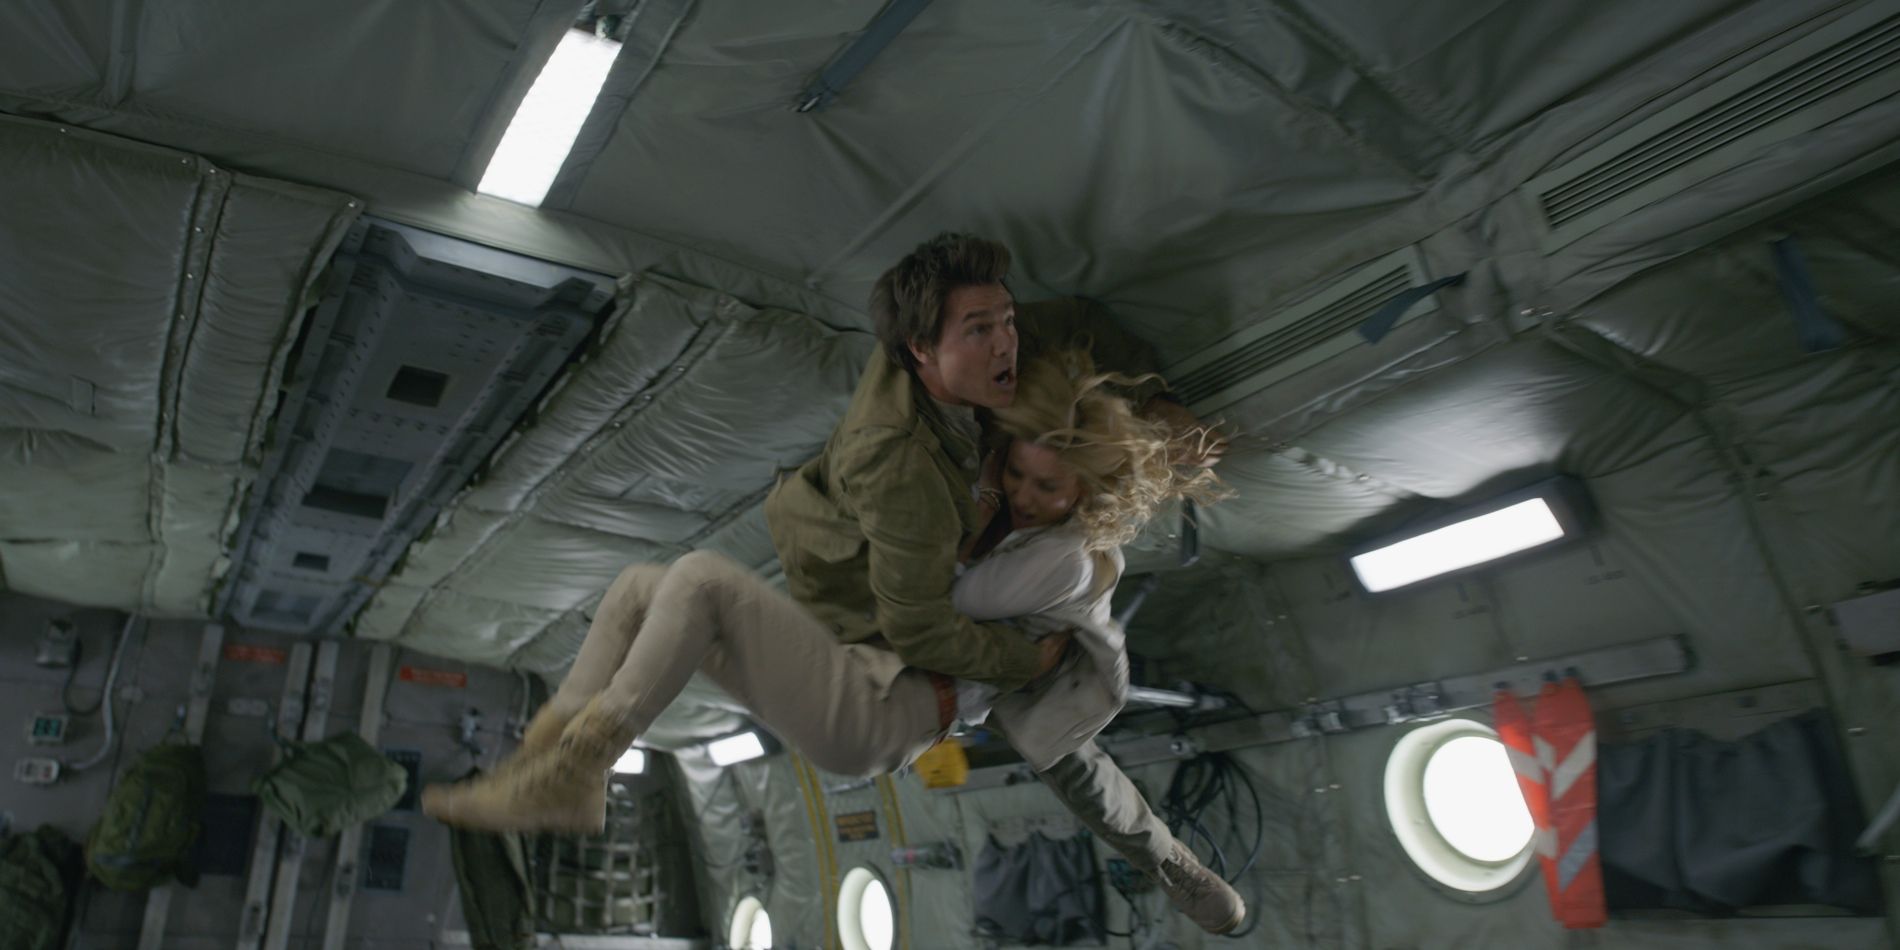 Tom Cruise and Annabelle Wallis in The Mummy in a plane as it crashes